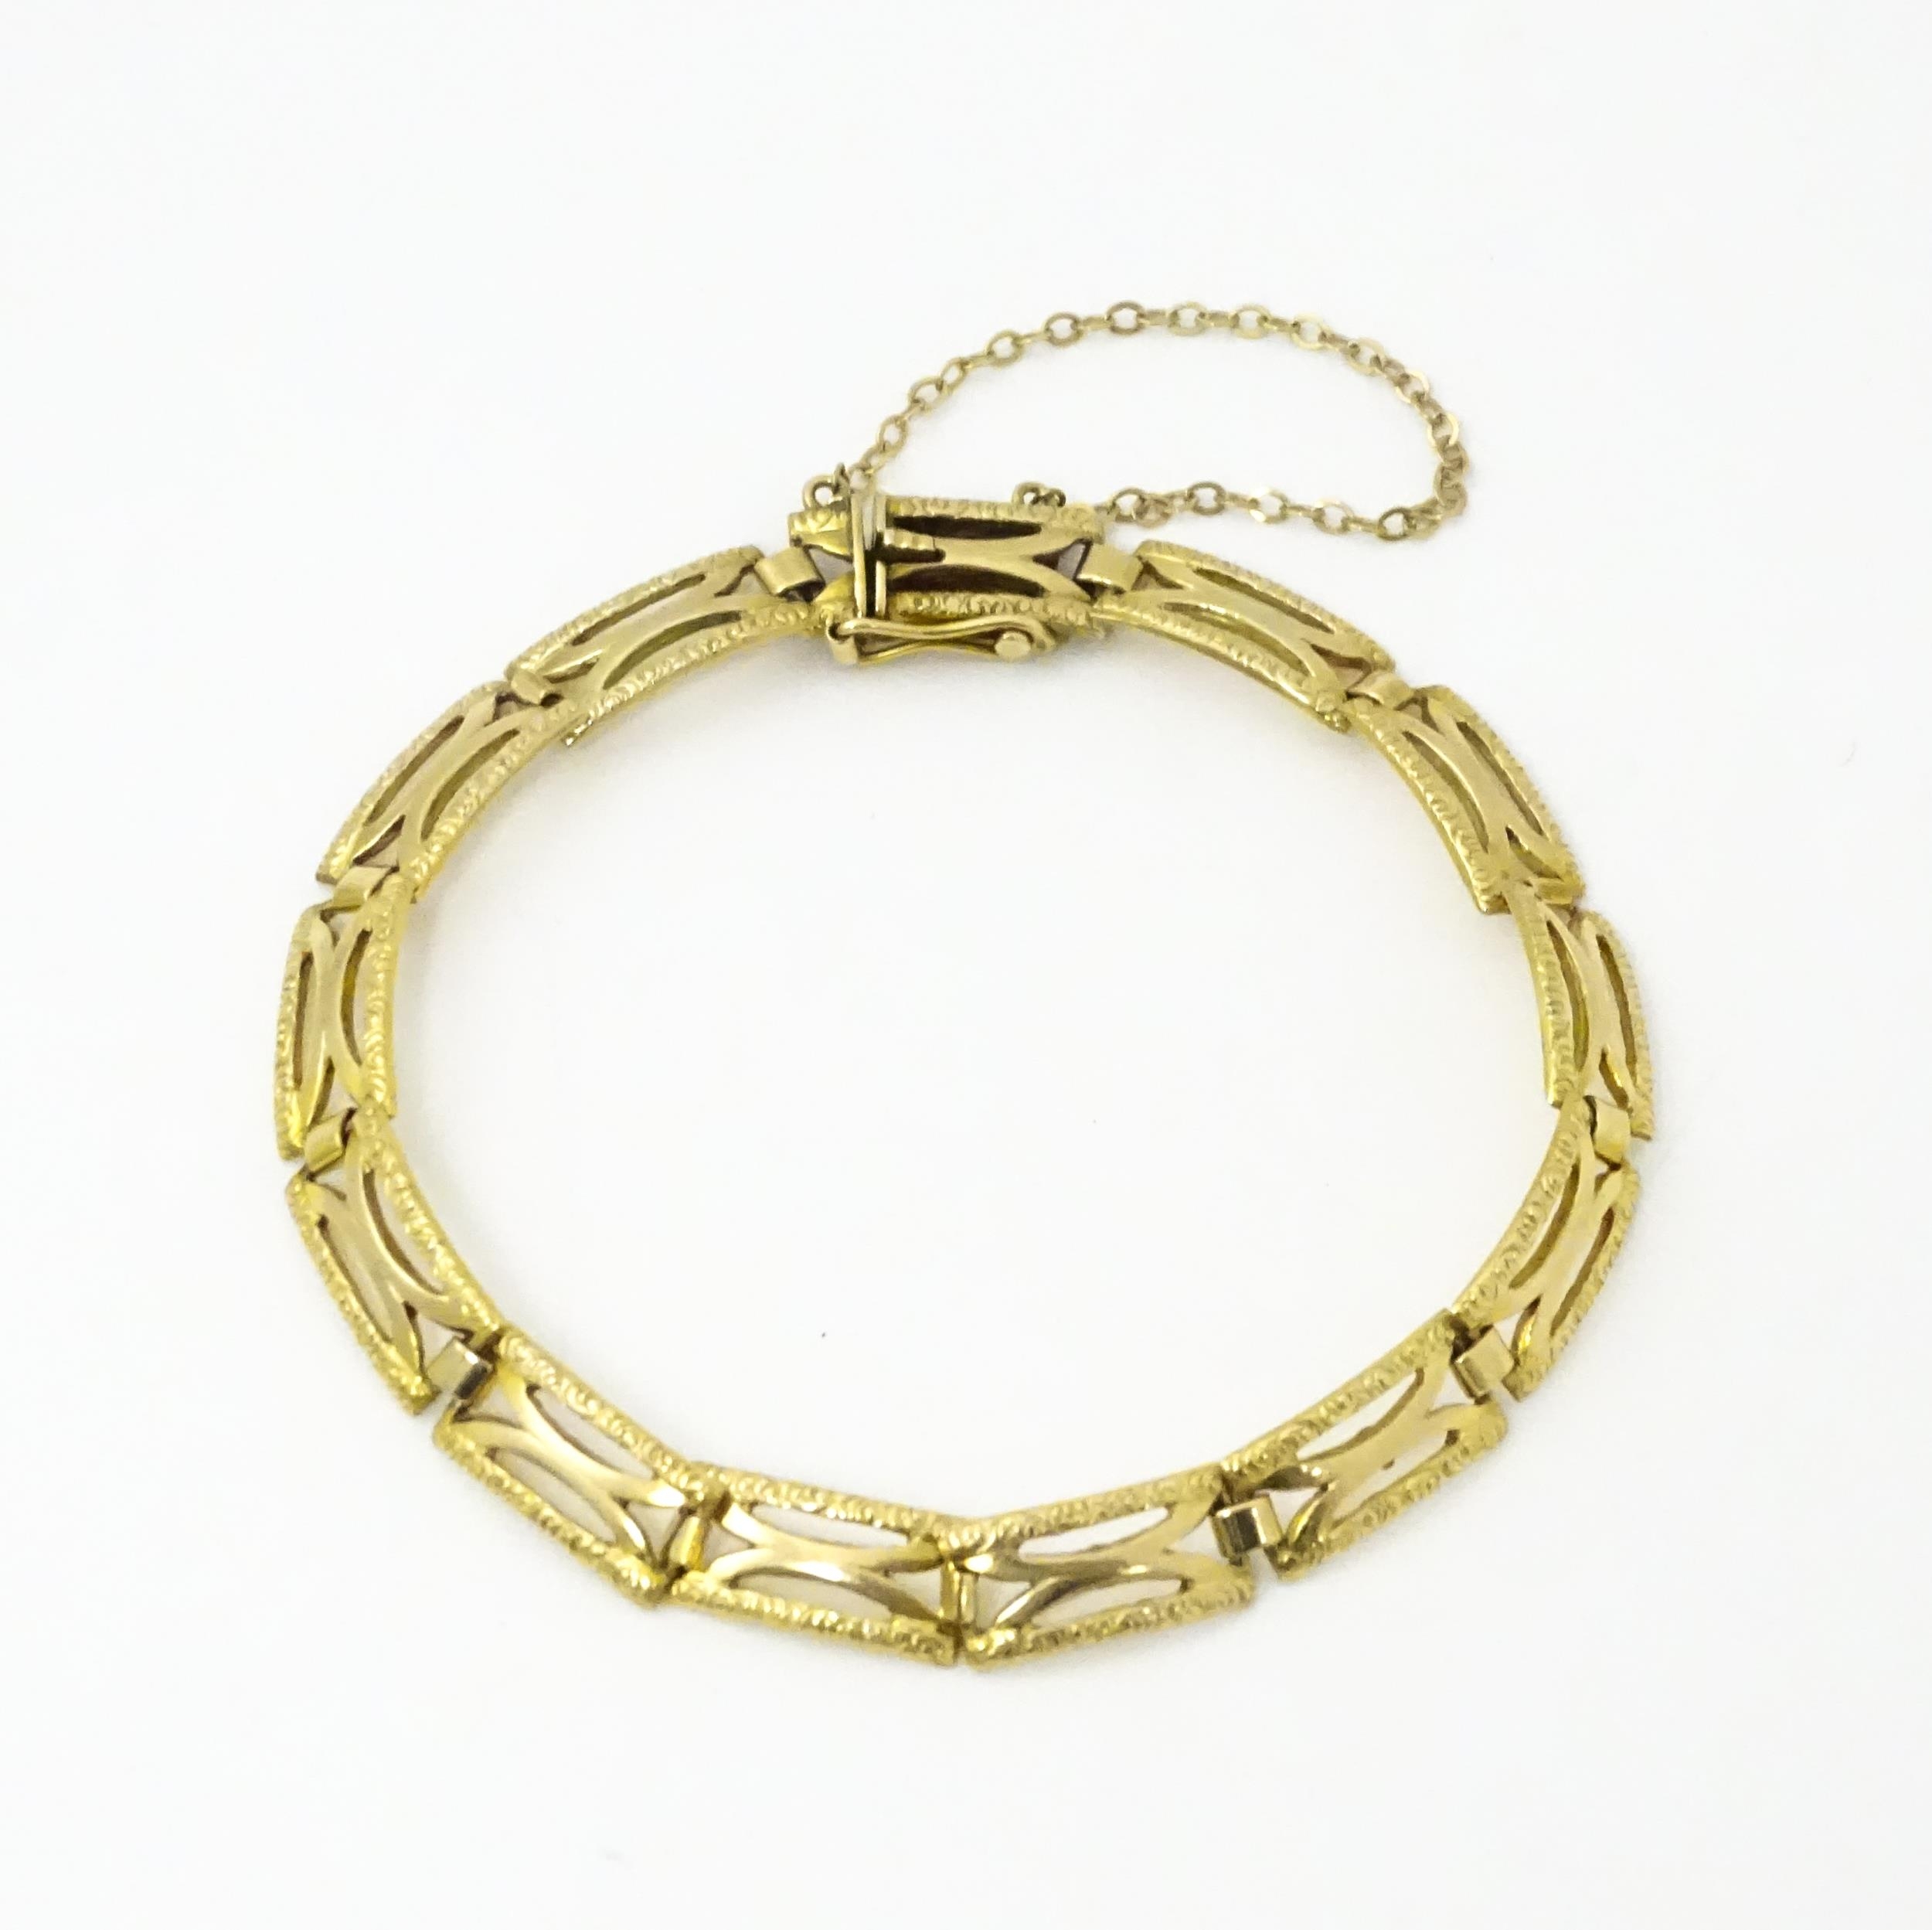 A 9ct gold bracelet with textured detail. Approx 7" long Please Note - we do not make reference to